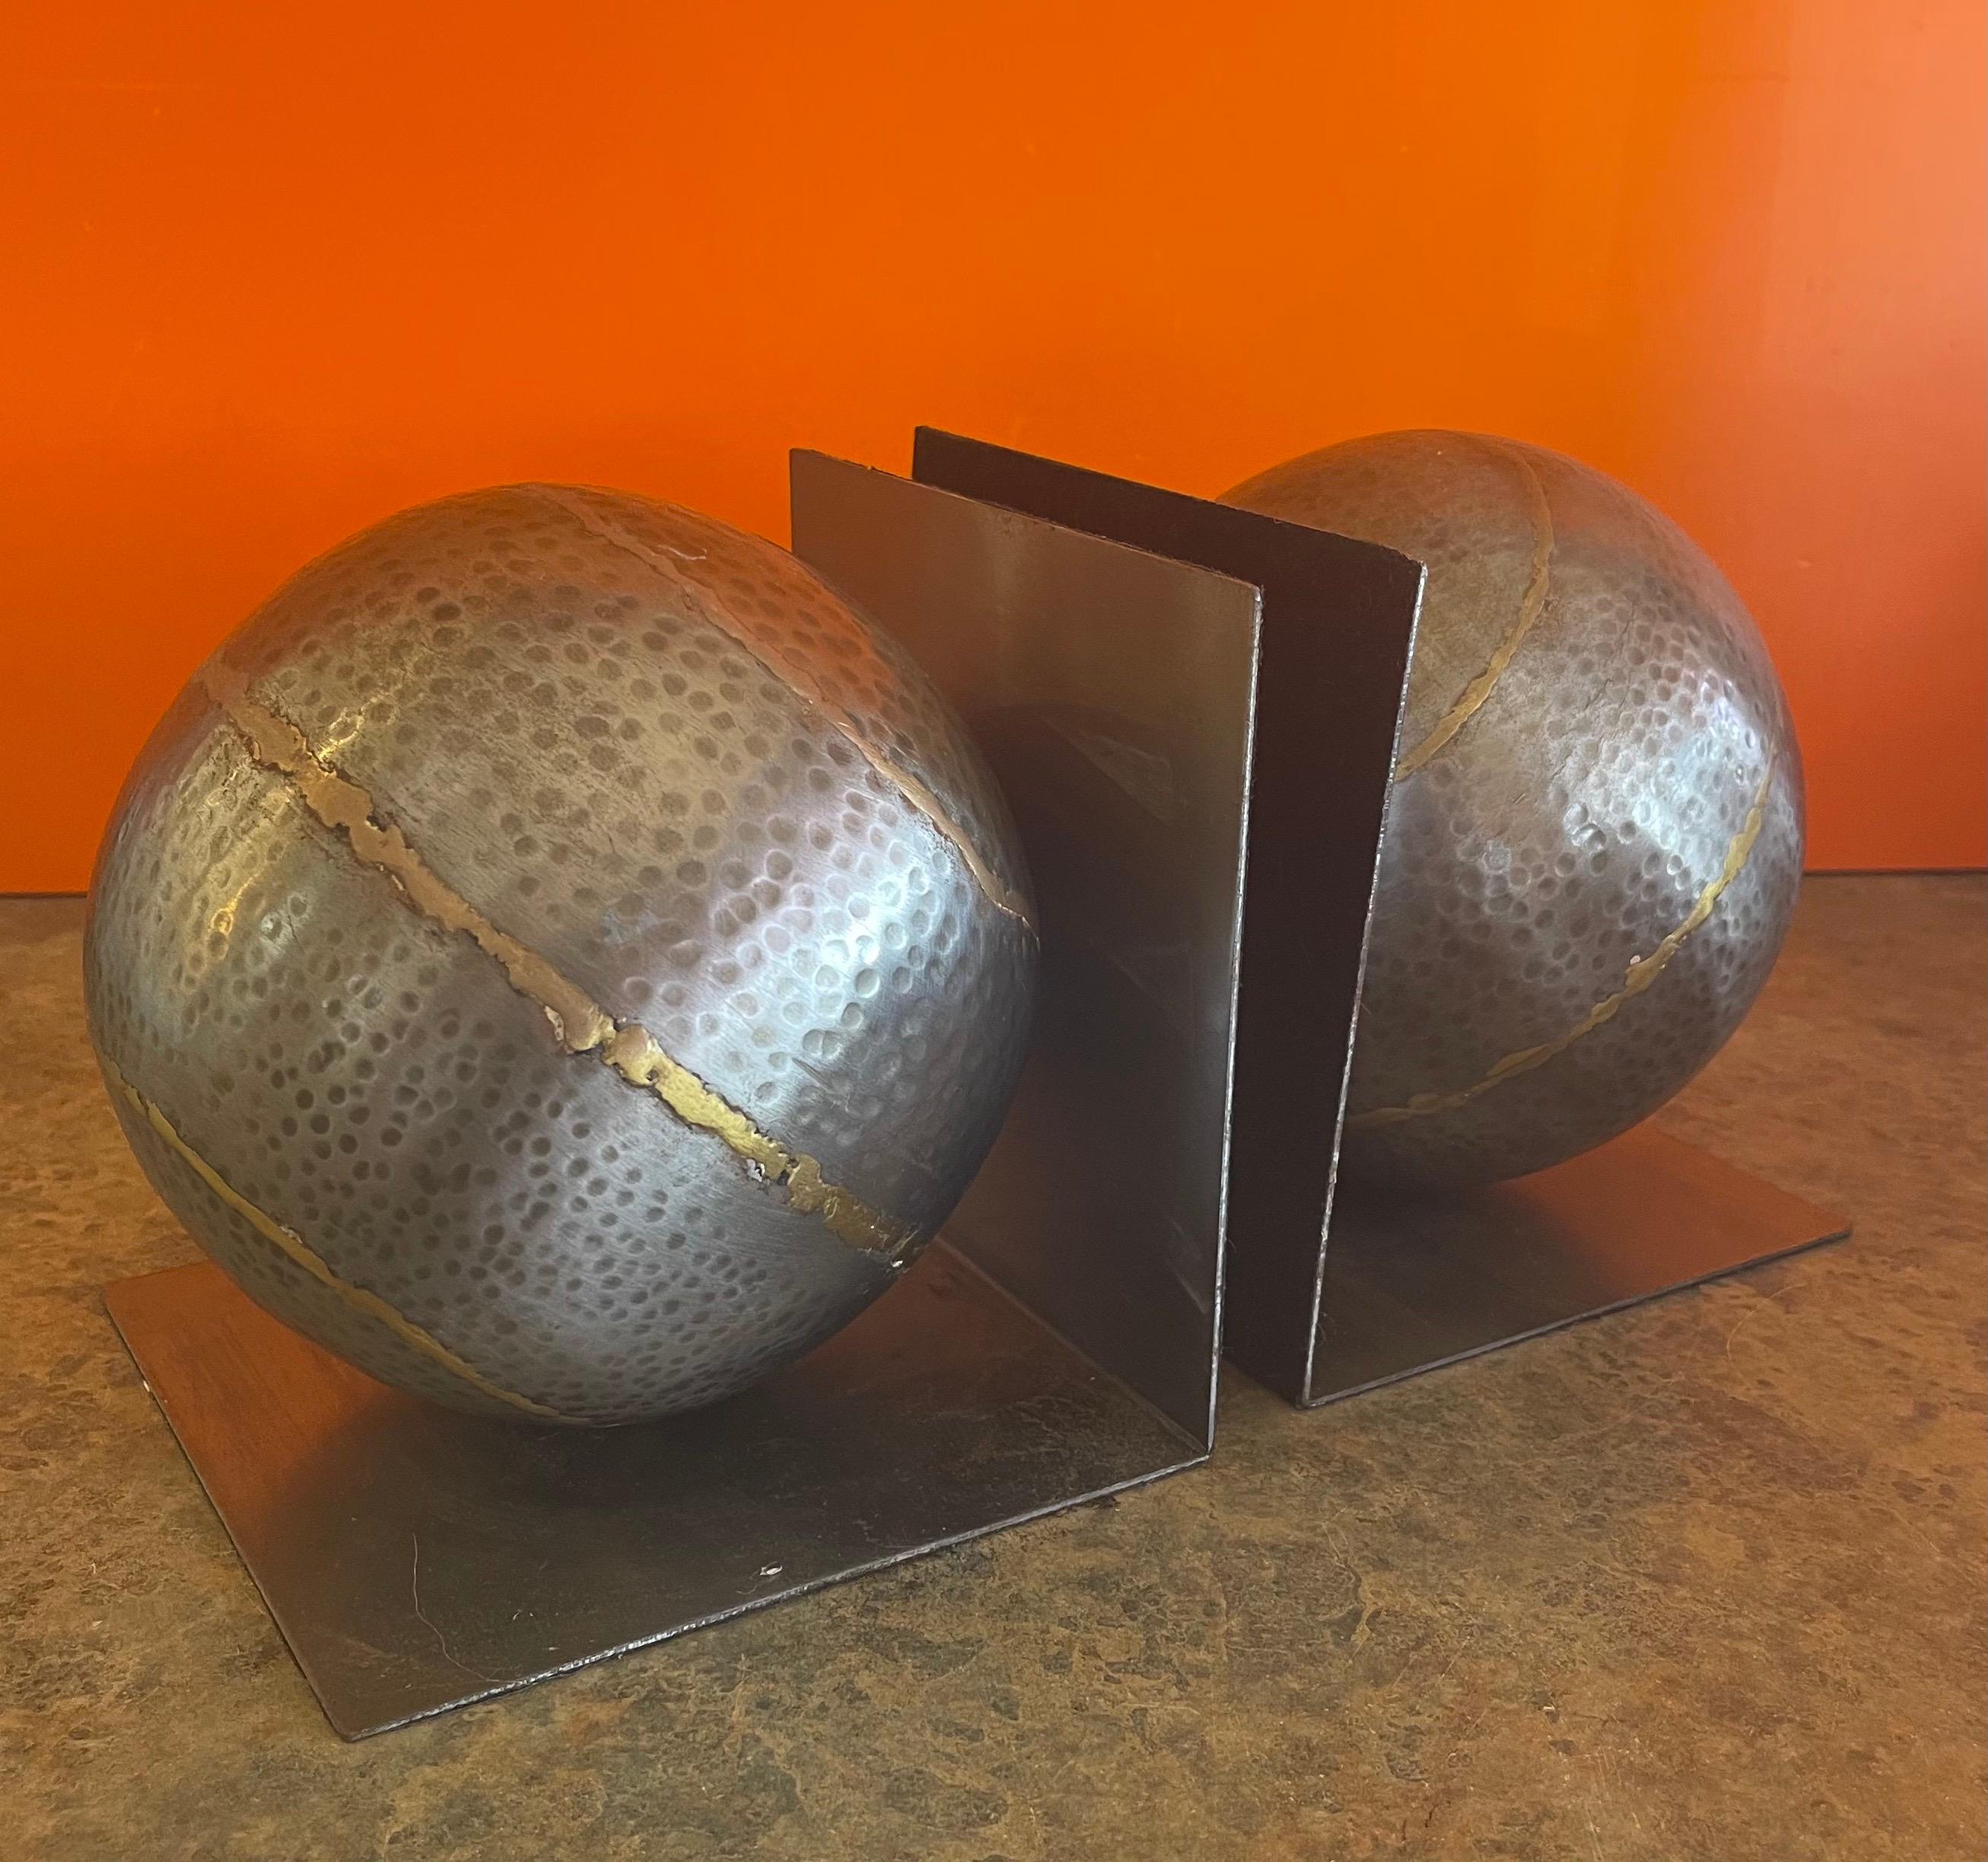 Cast Pair of Minimalist Bookends in Zinc and Brass by Arterriors